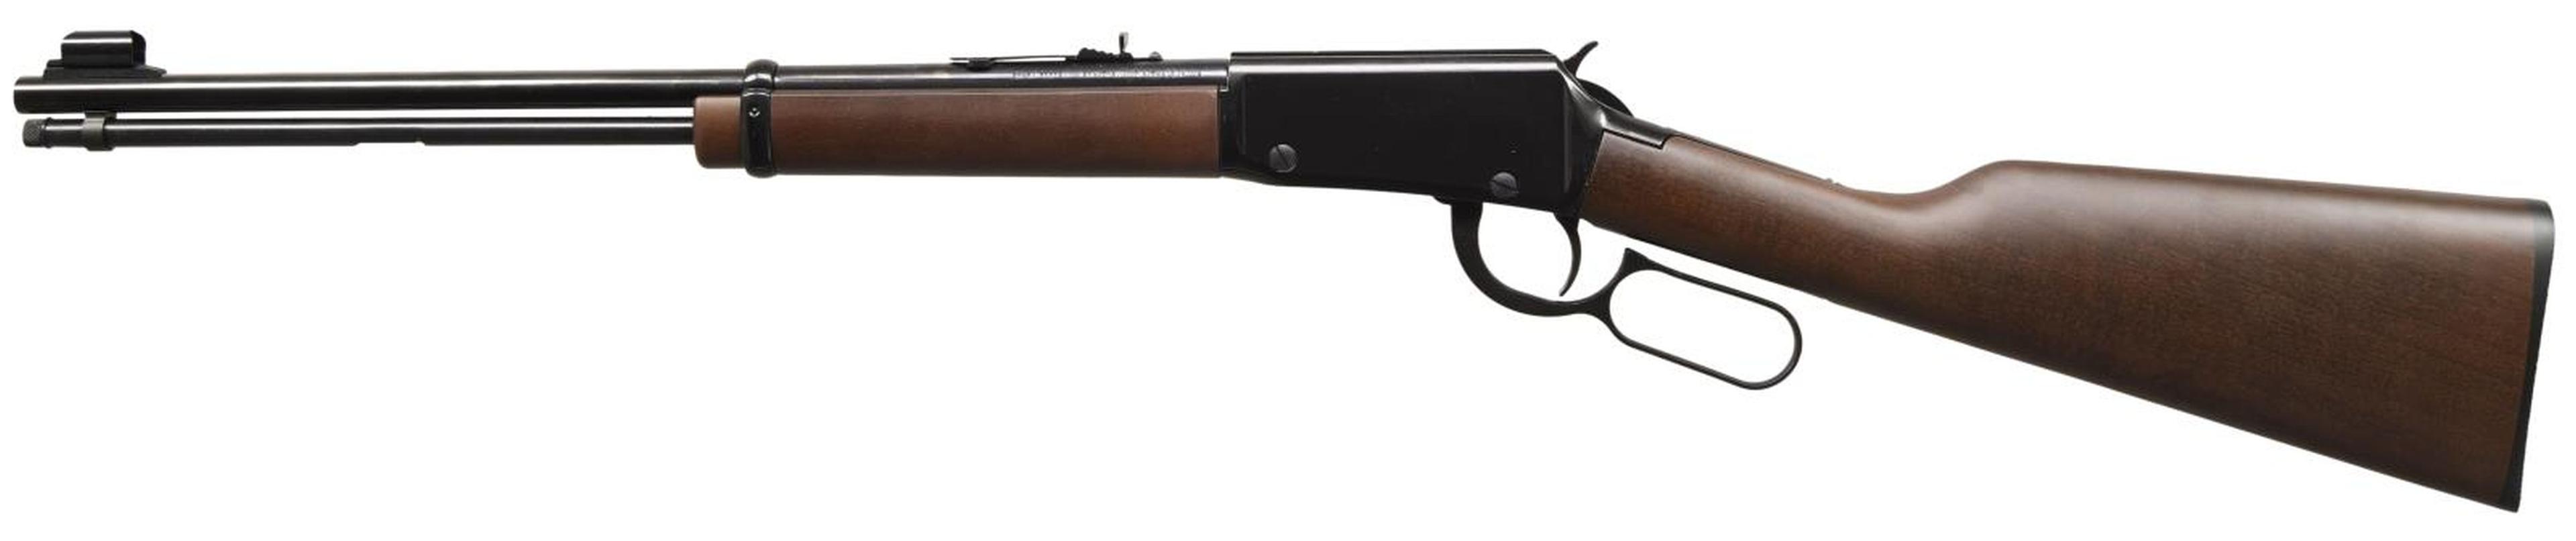 HENRY REPEATING ARMS MODEL H001 LEVER ACTION RIFLE